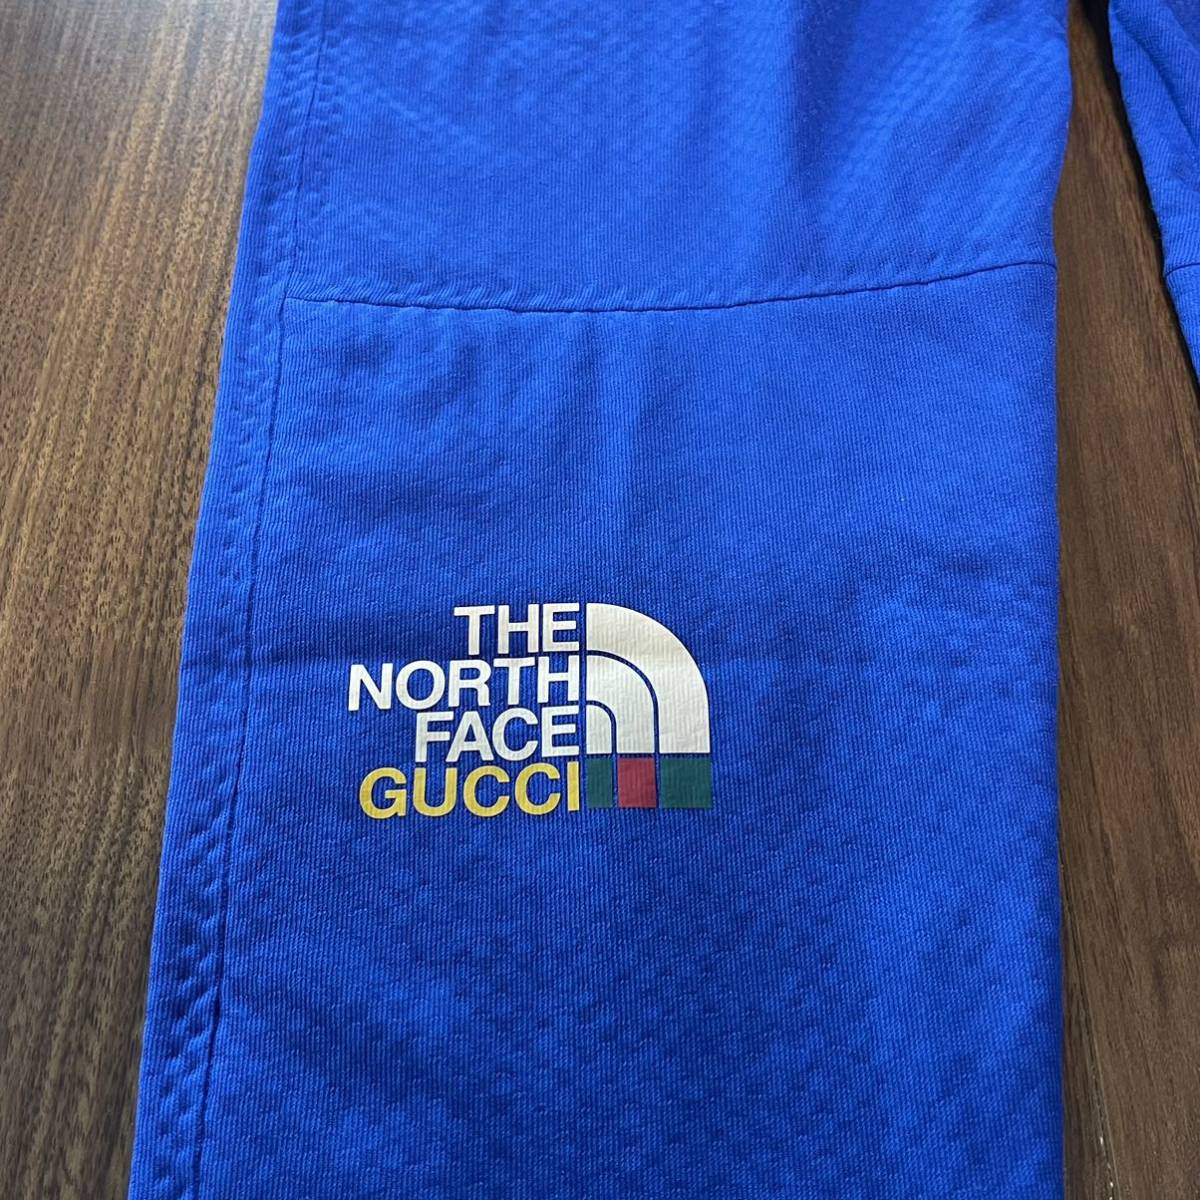  Gucci (GUCCI)× THE NORTH FACE( The North Face ) blue fleece pants jersey pants leggings pants Technica ru jersey new goods S